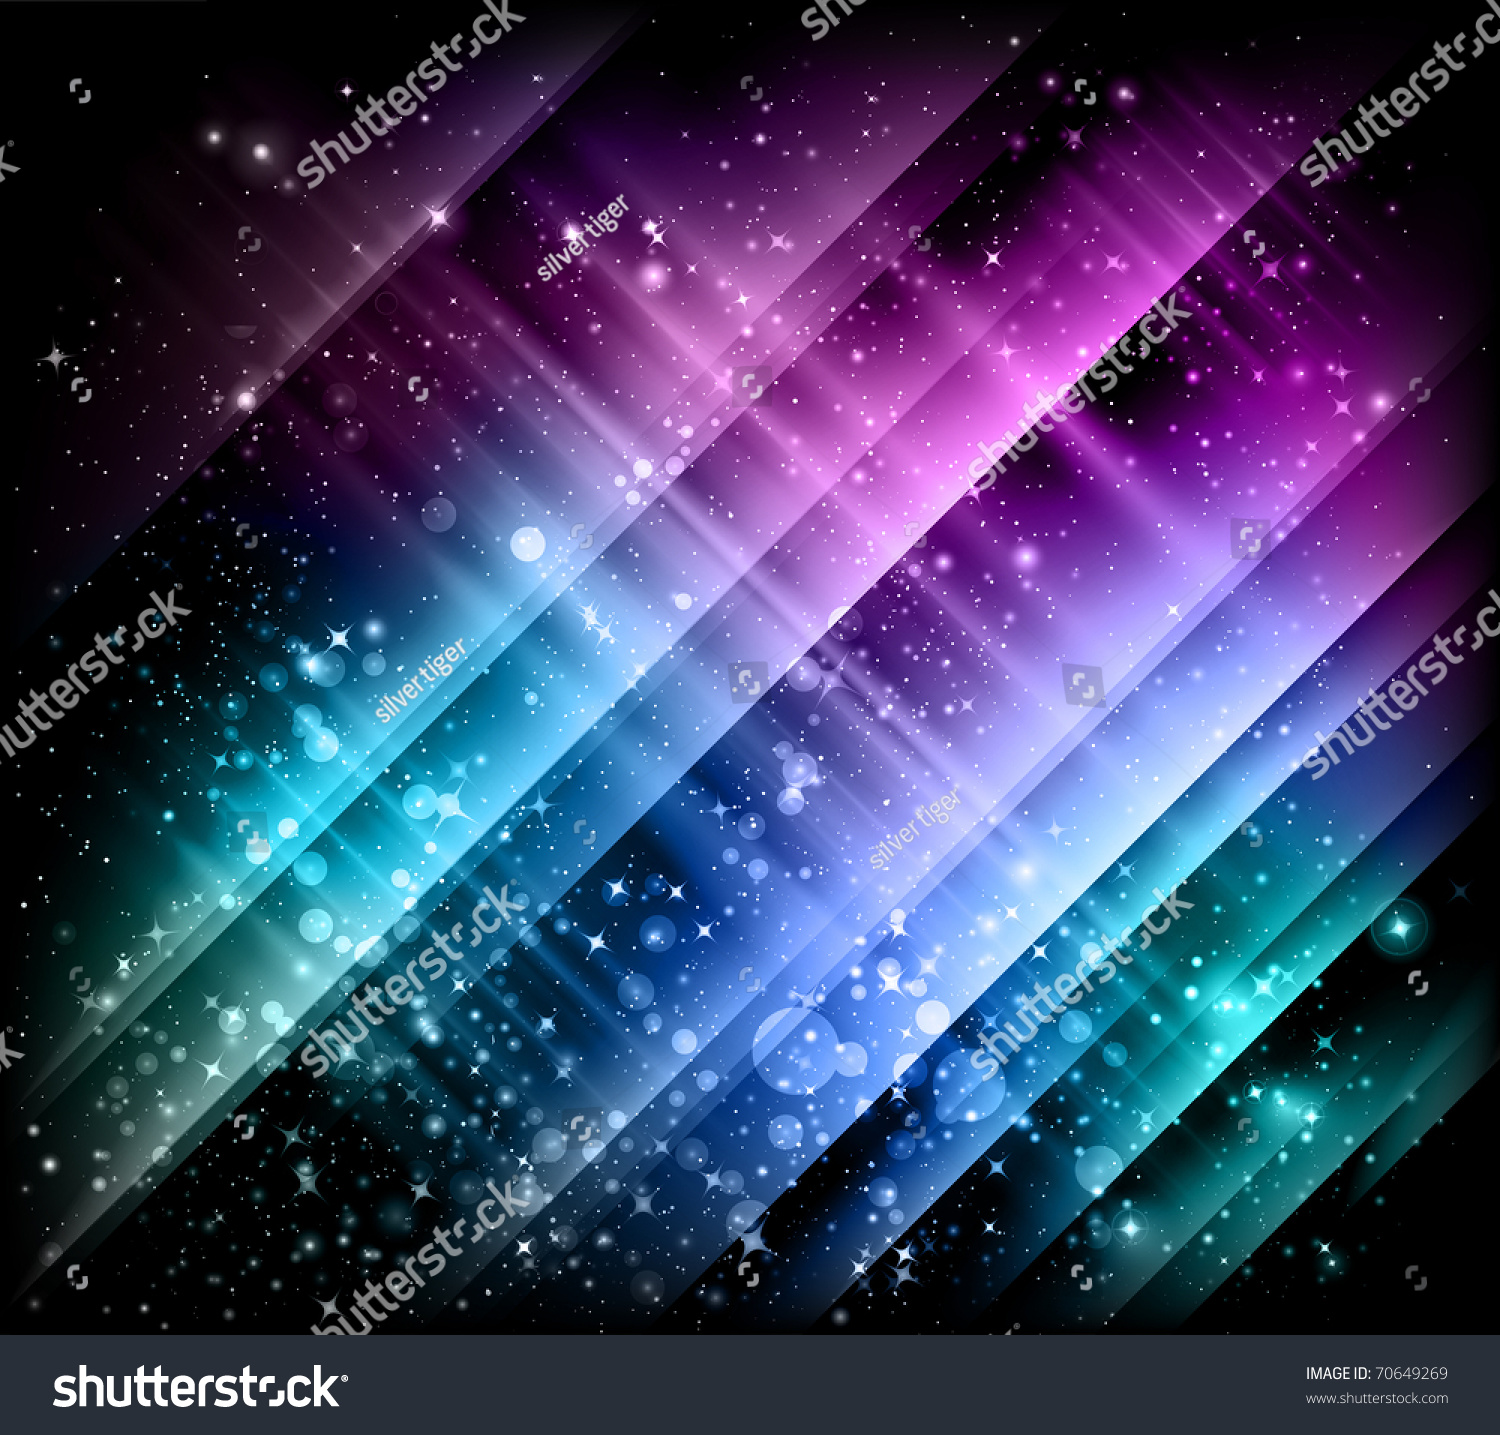 Outstanding Abstract Background JPG Version Stock Illustration 70649269 ...